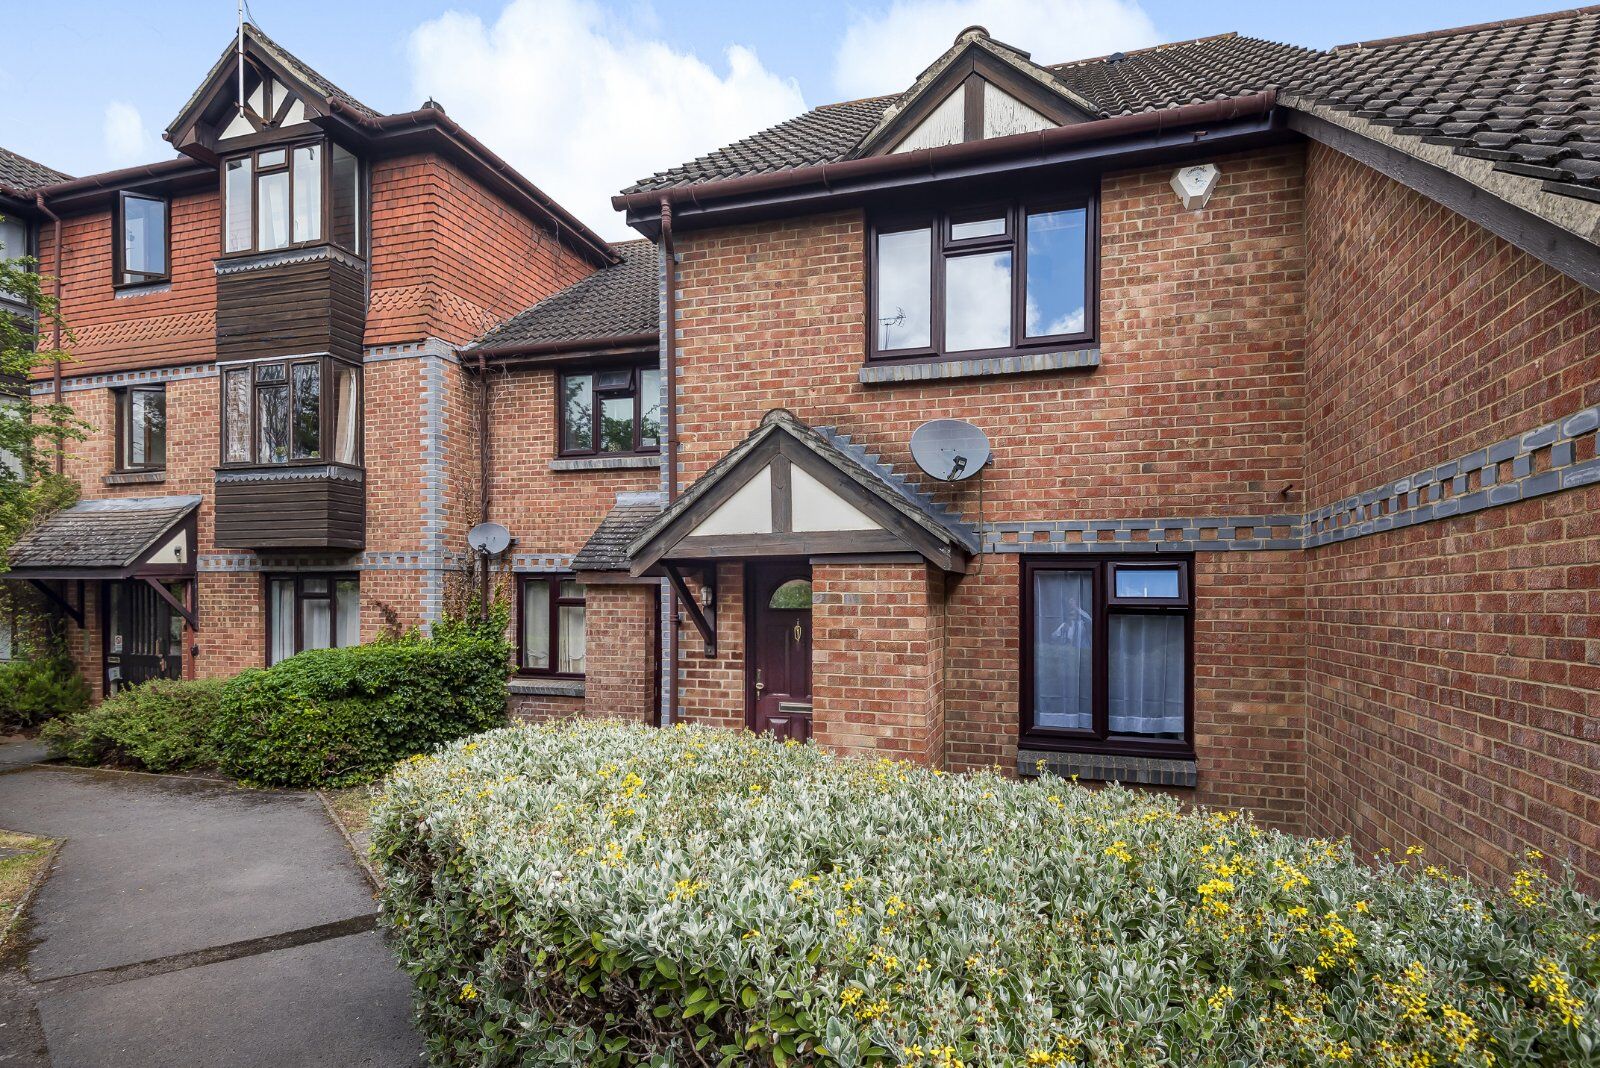 1 bedroom end terraced house for sale Granby Court, Reading, RG1, main image